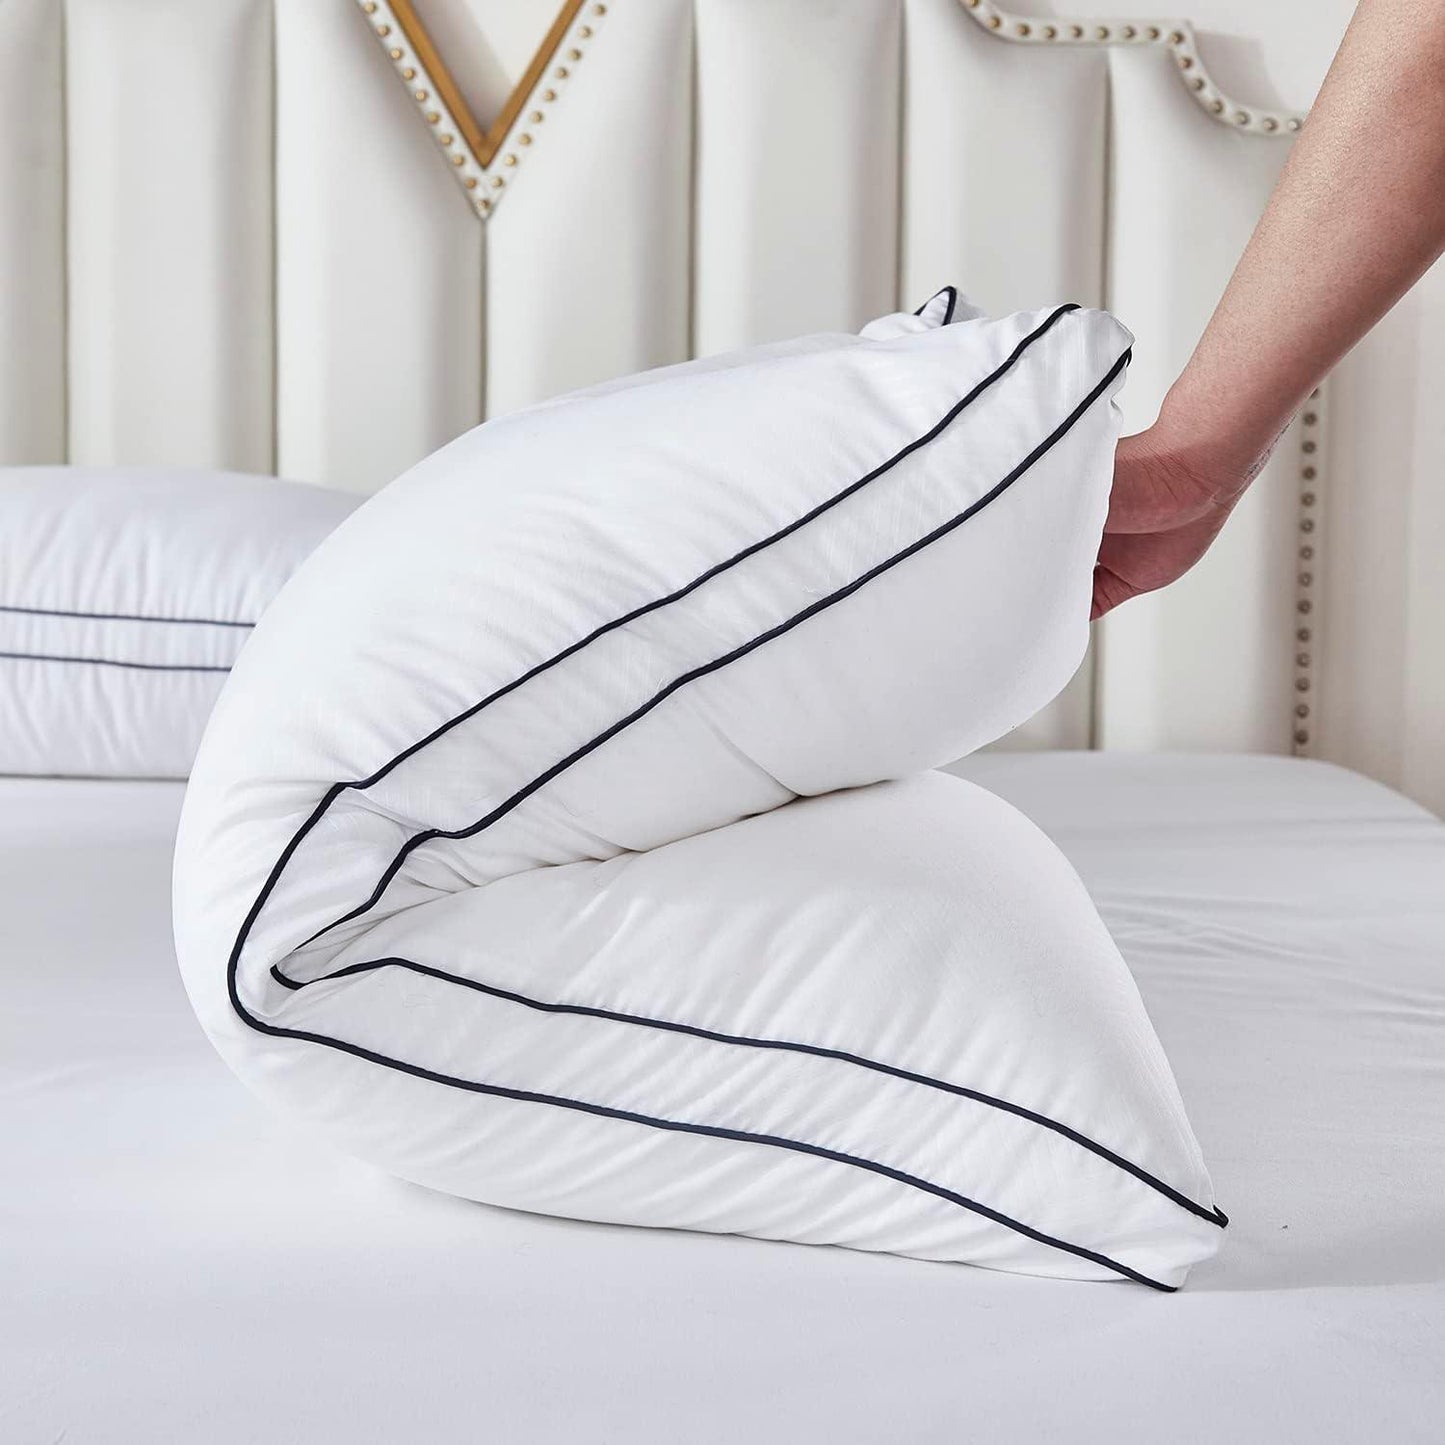 -Bed Pillows for Sleeping 2 Pack, Cooling Gel Pillows, Ultra Soft Breathable Down Alternative Pillows, Stomach or Side Sleepers (Queen-18''X27'')